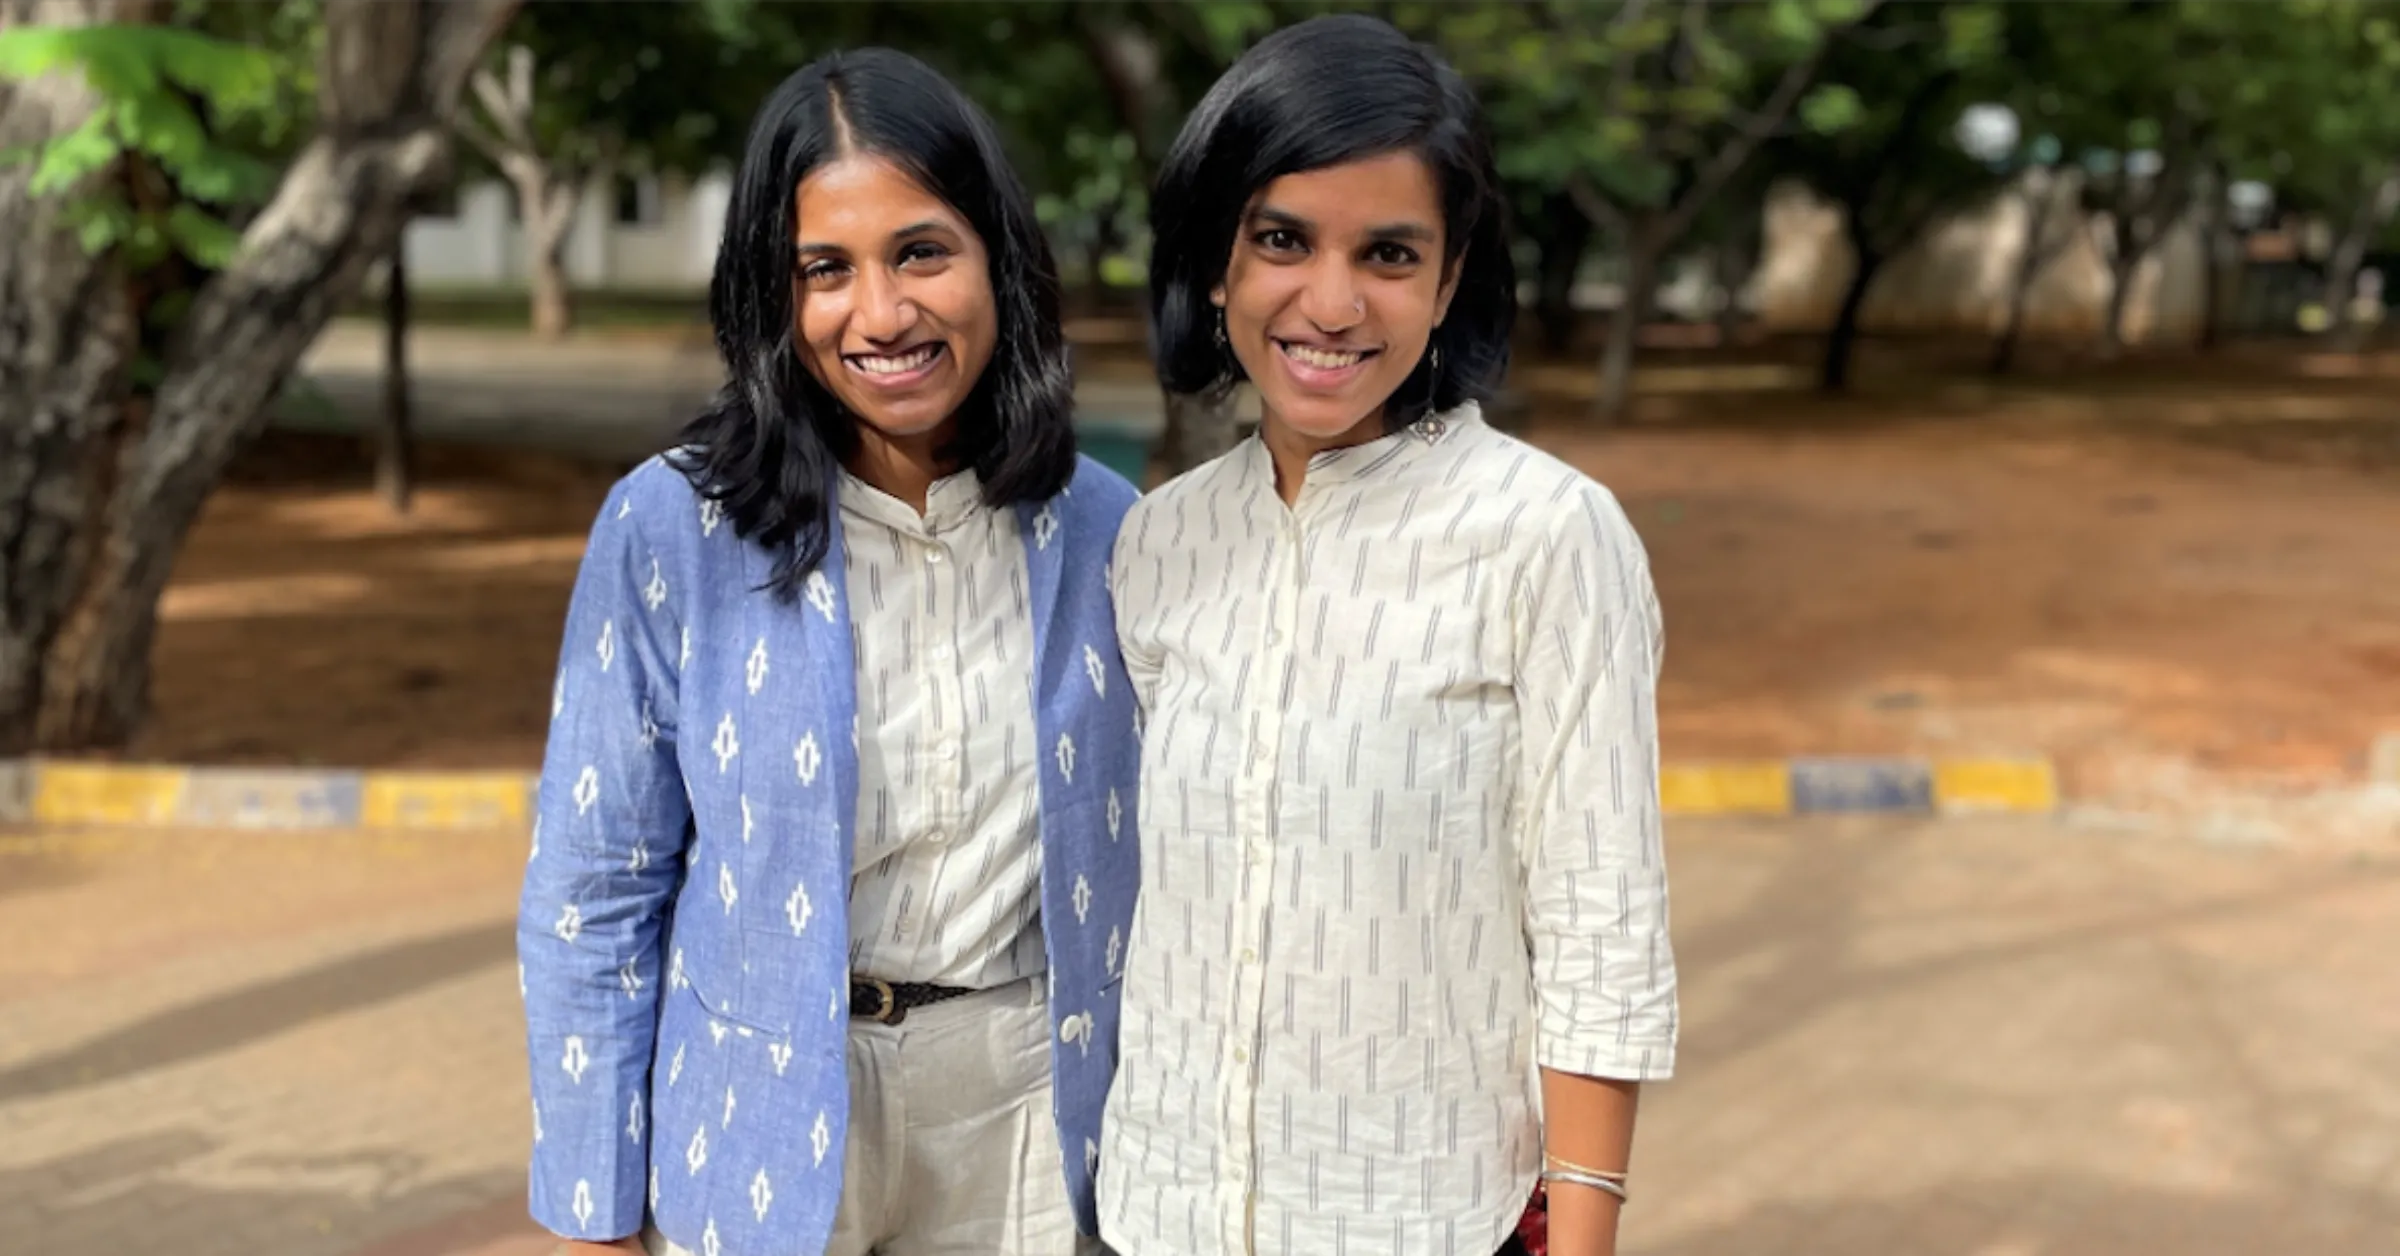 Tanvi Bikhchandani (right) and Charanya Shekar, founders of clothing brand Tamarind Chutney pose for a picture in India